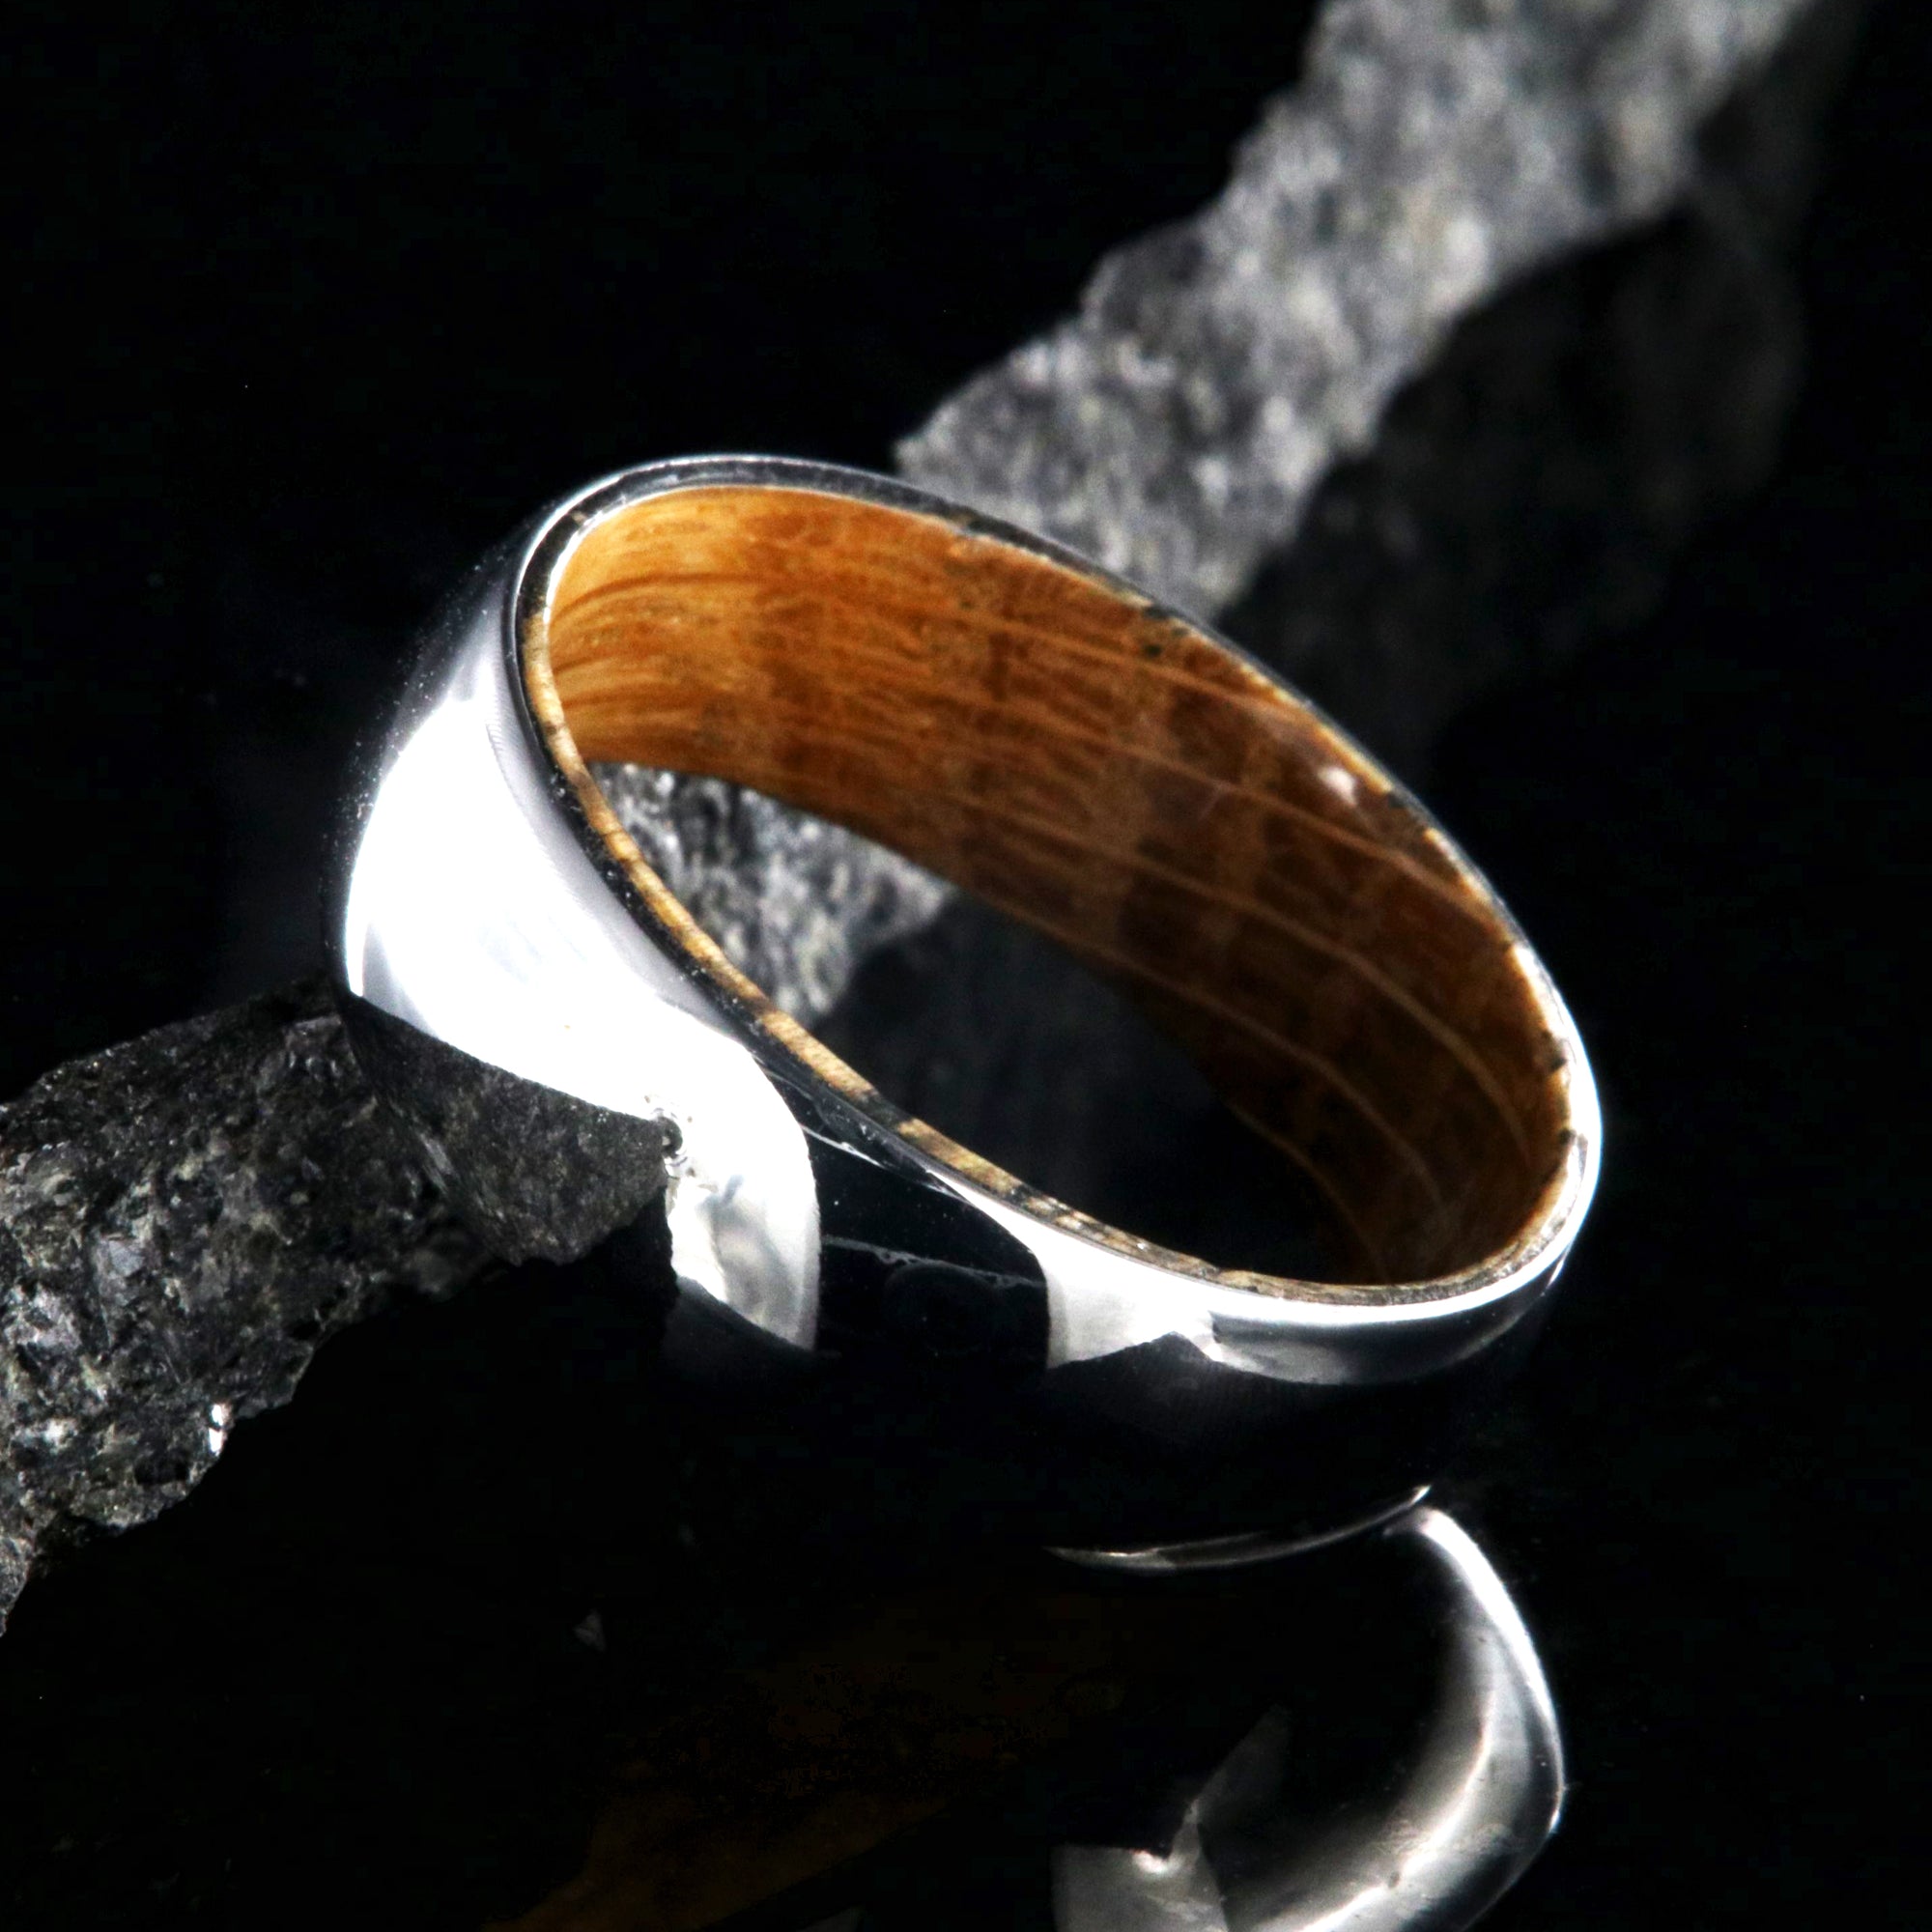 7mm wide cobalt wedding ring with a high polish and whiskey barrel sleeve